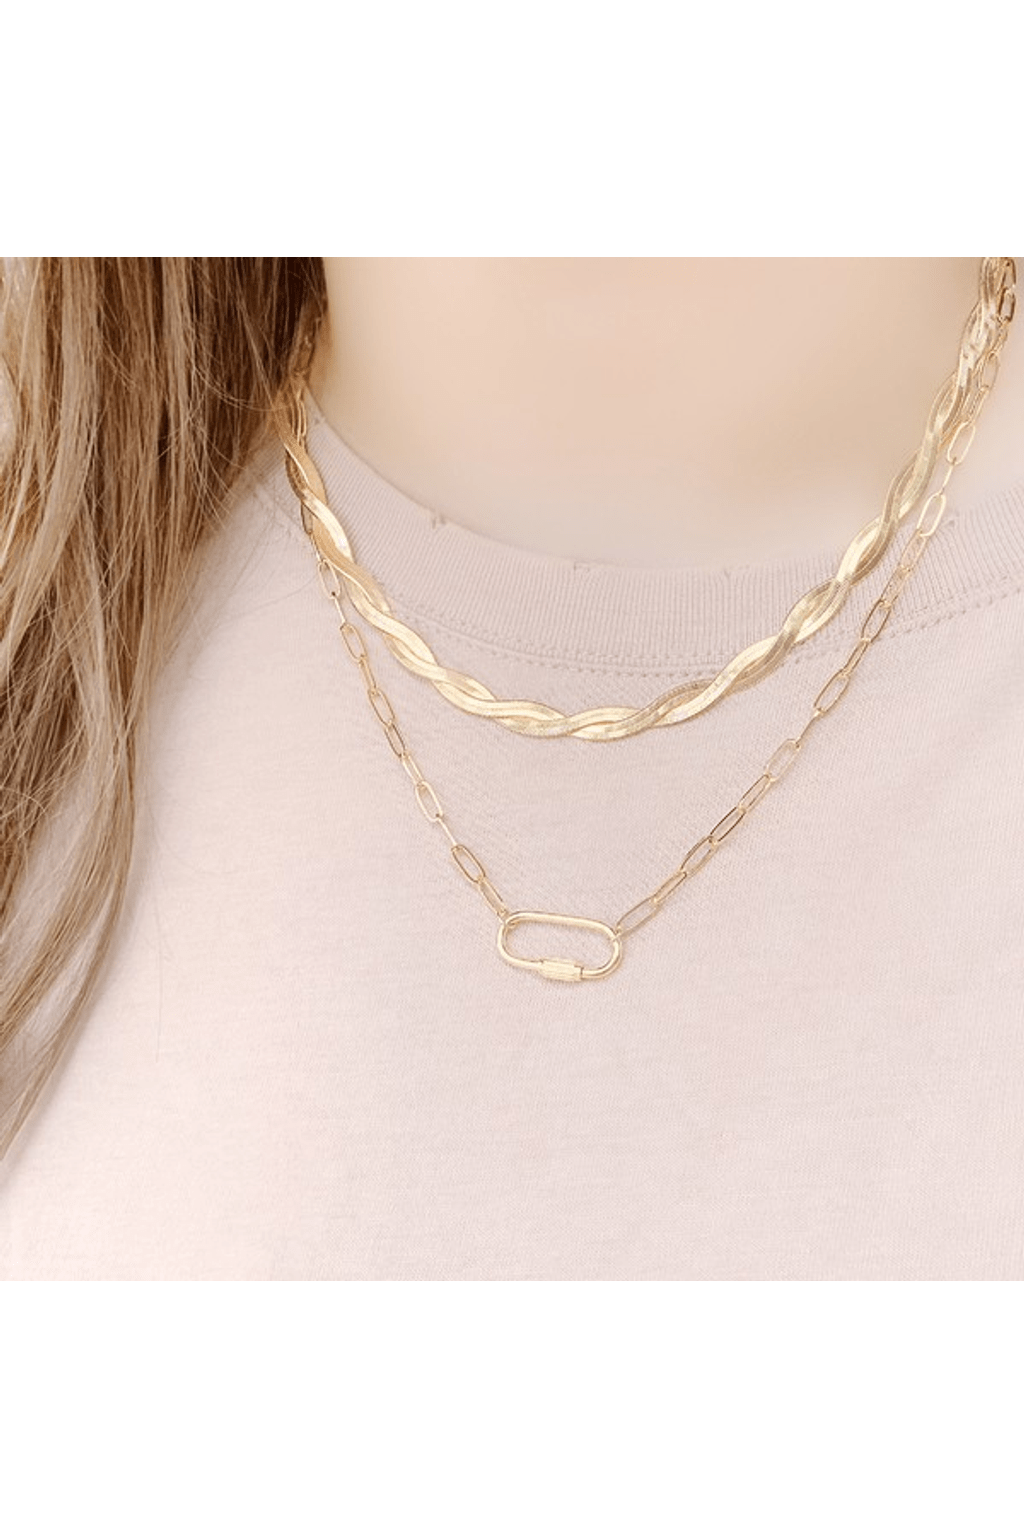 Averie Carabiner Necklace